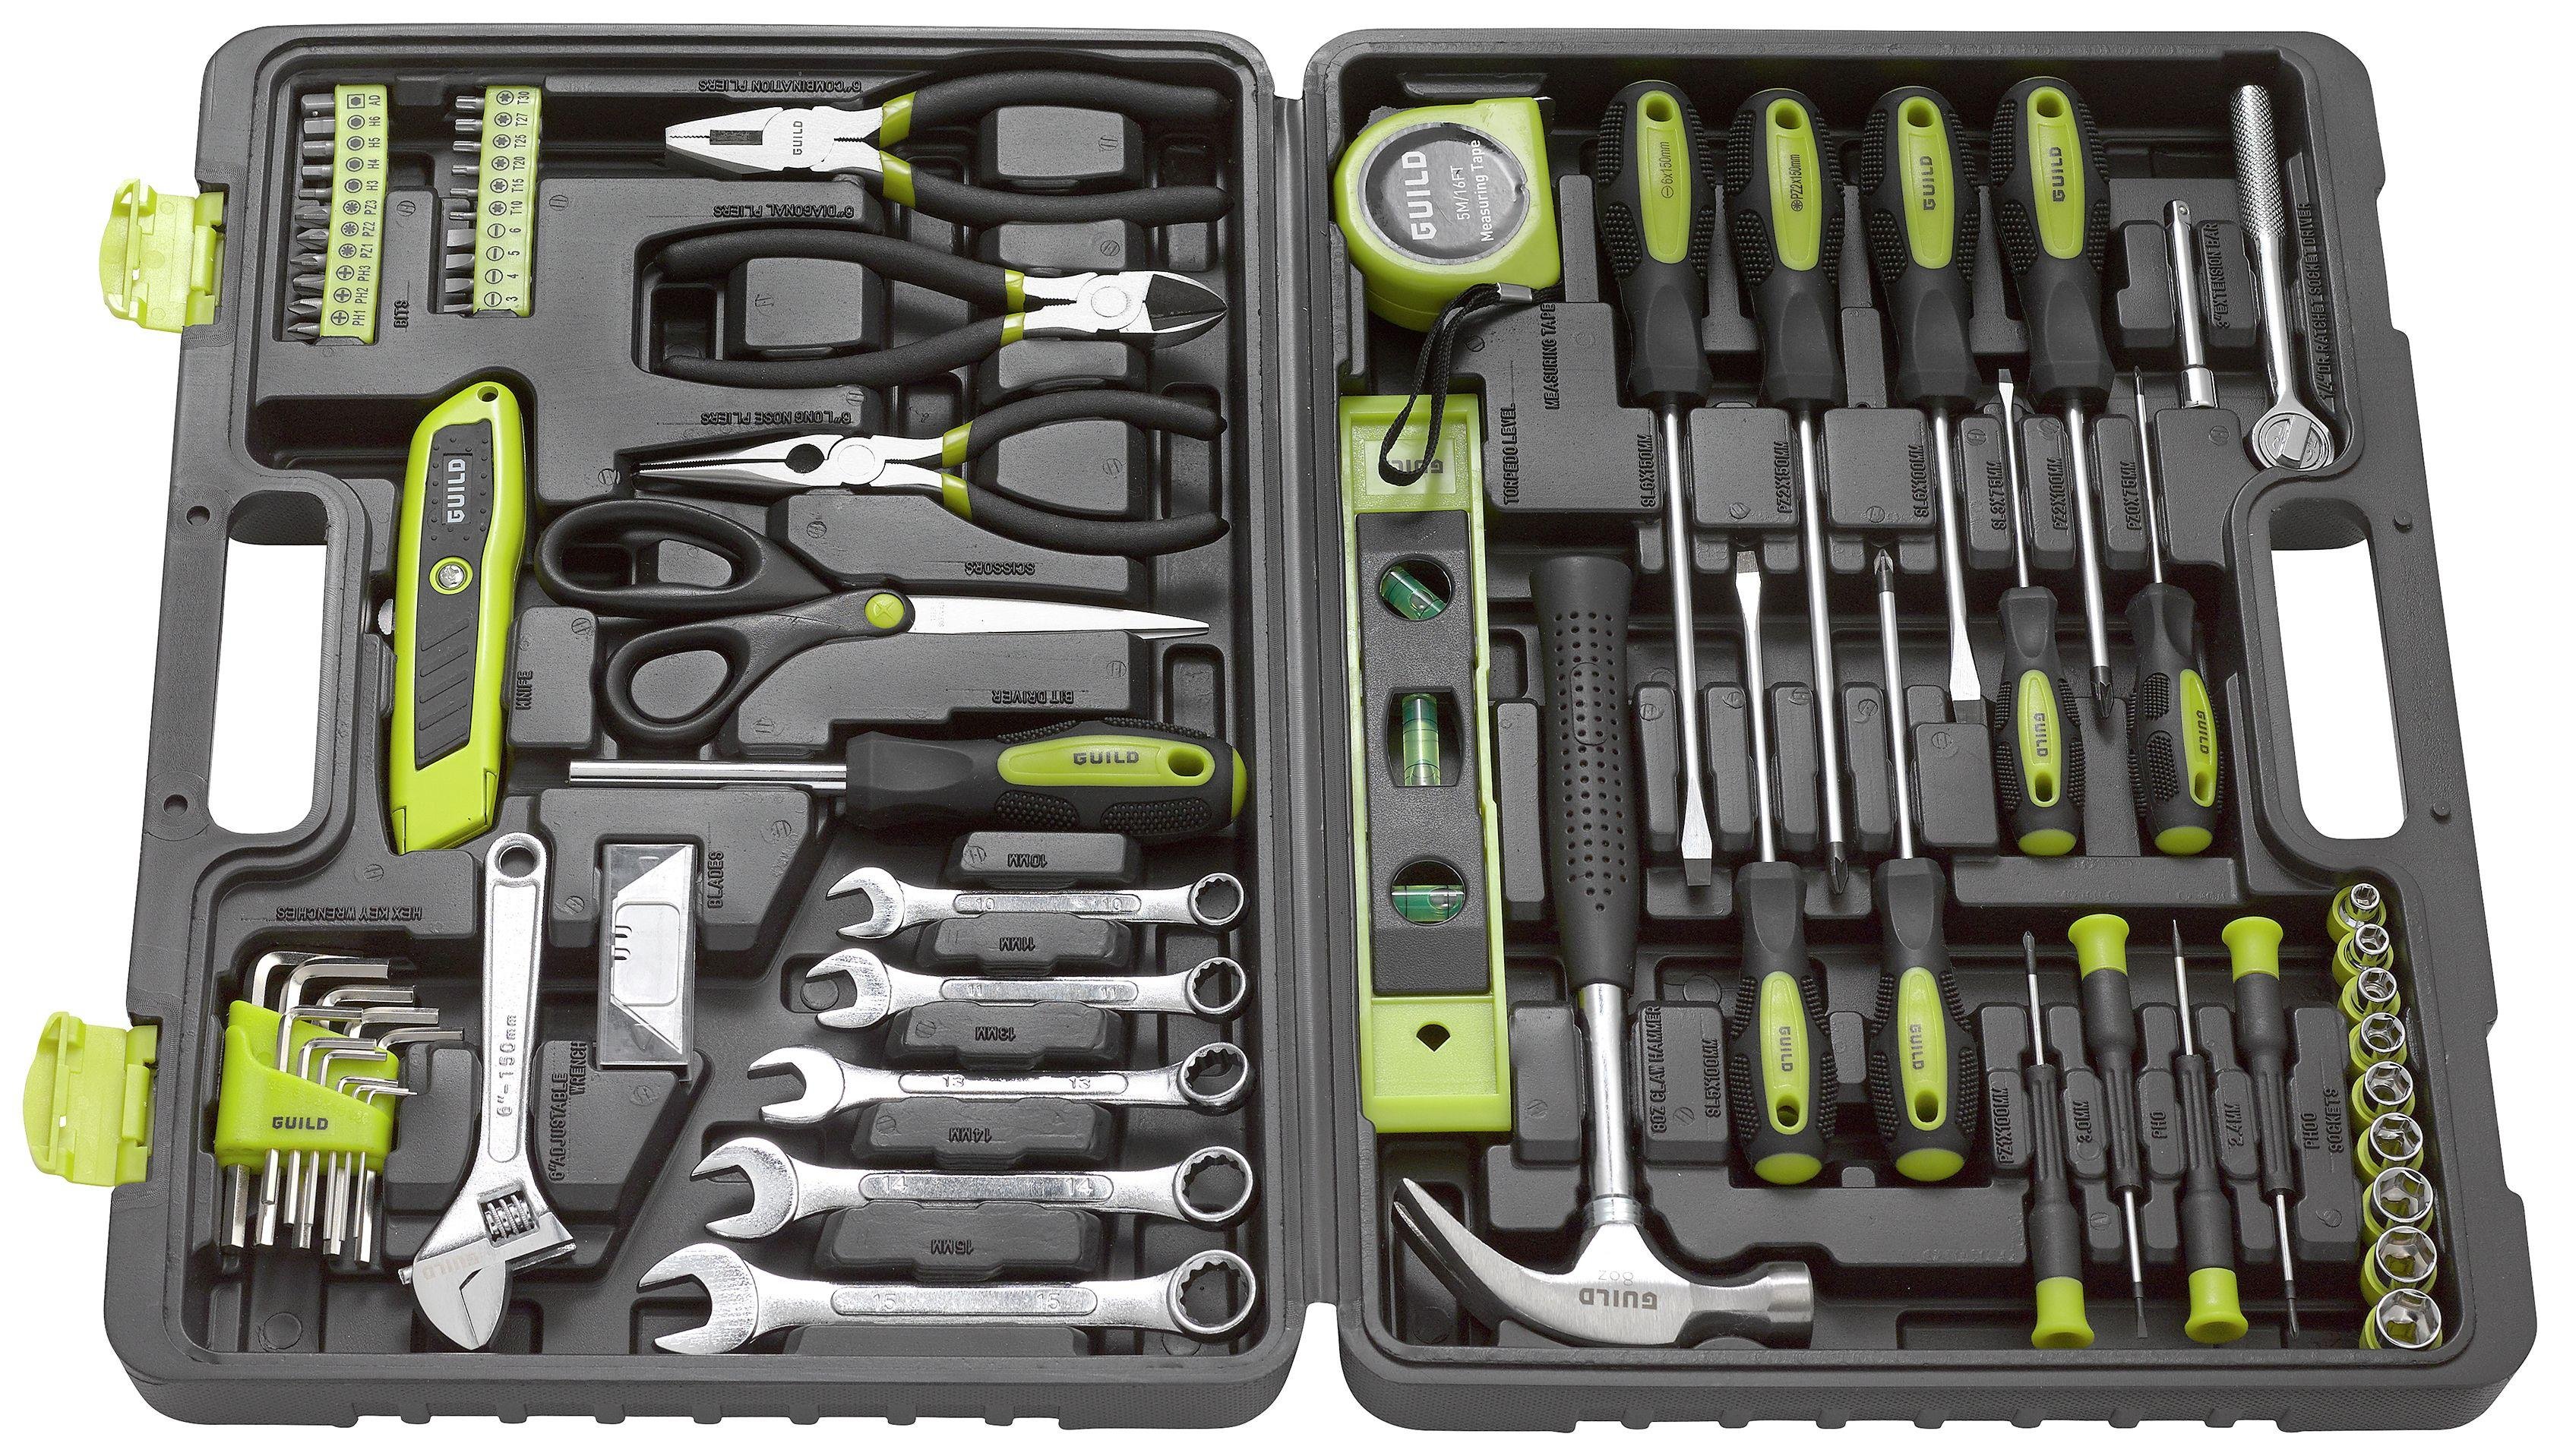 Guild 80 Piece Handtool Kit. Review